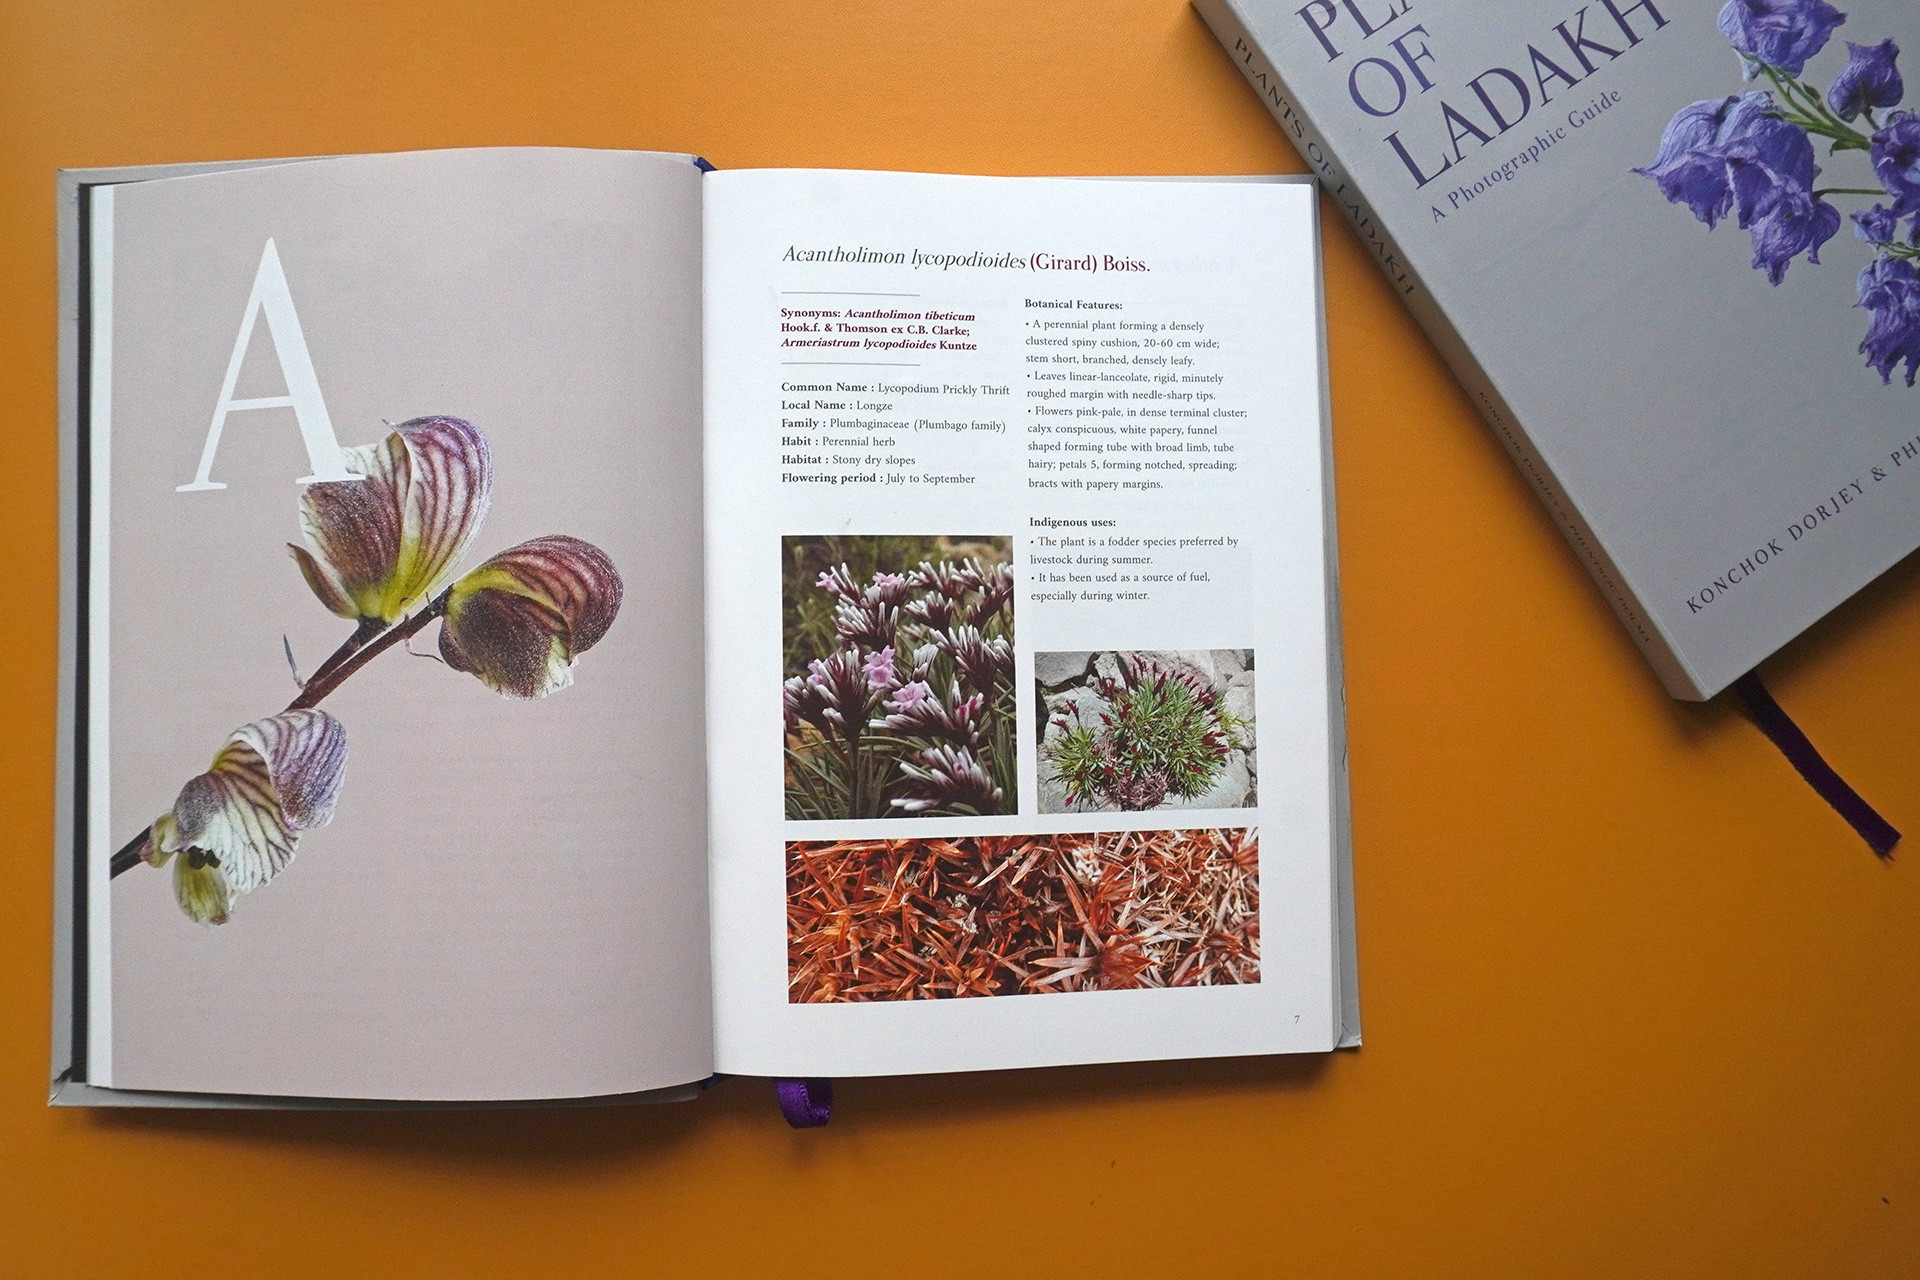 New Photographic Field Guide On The Floral Diversity Of Ladakh | Nature ...